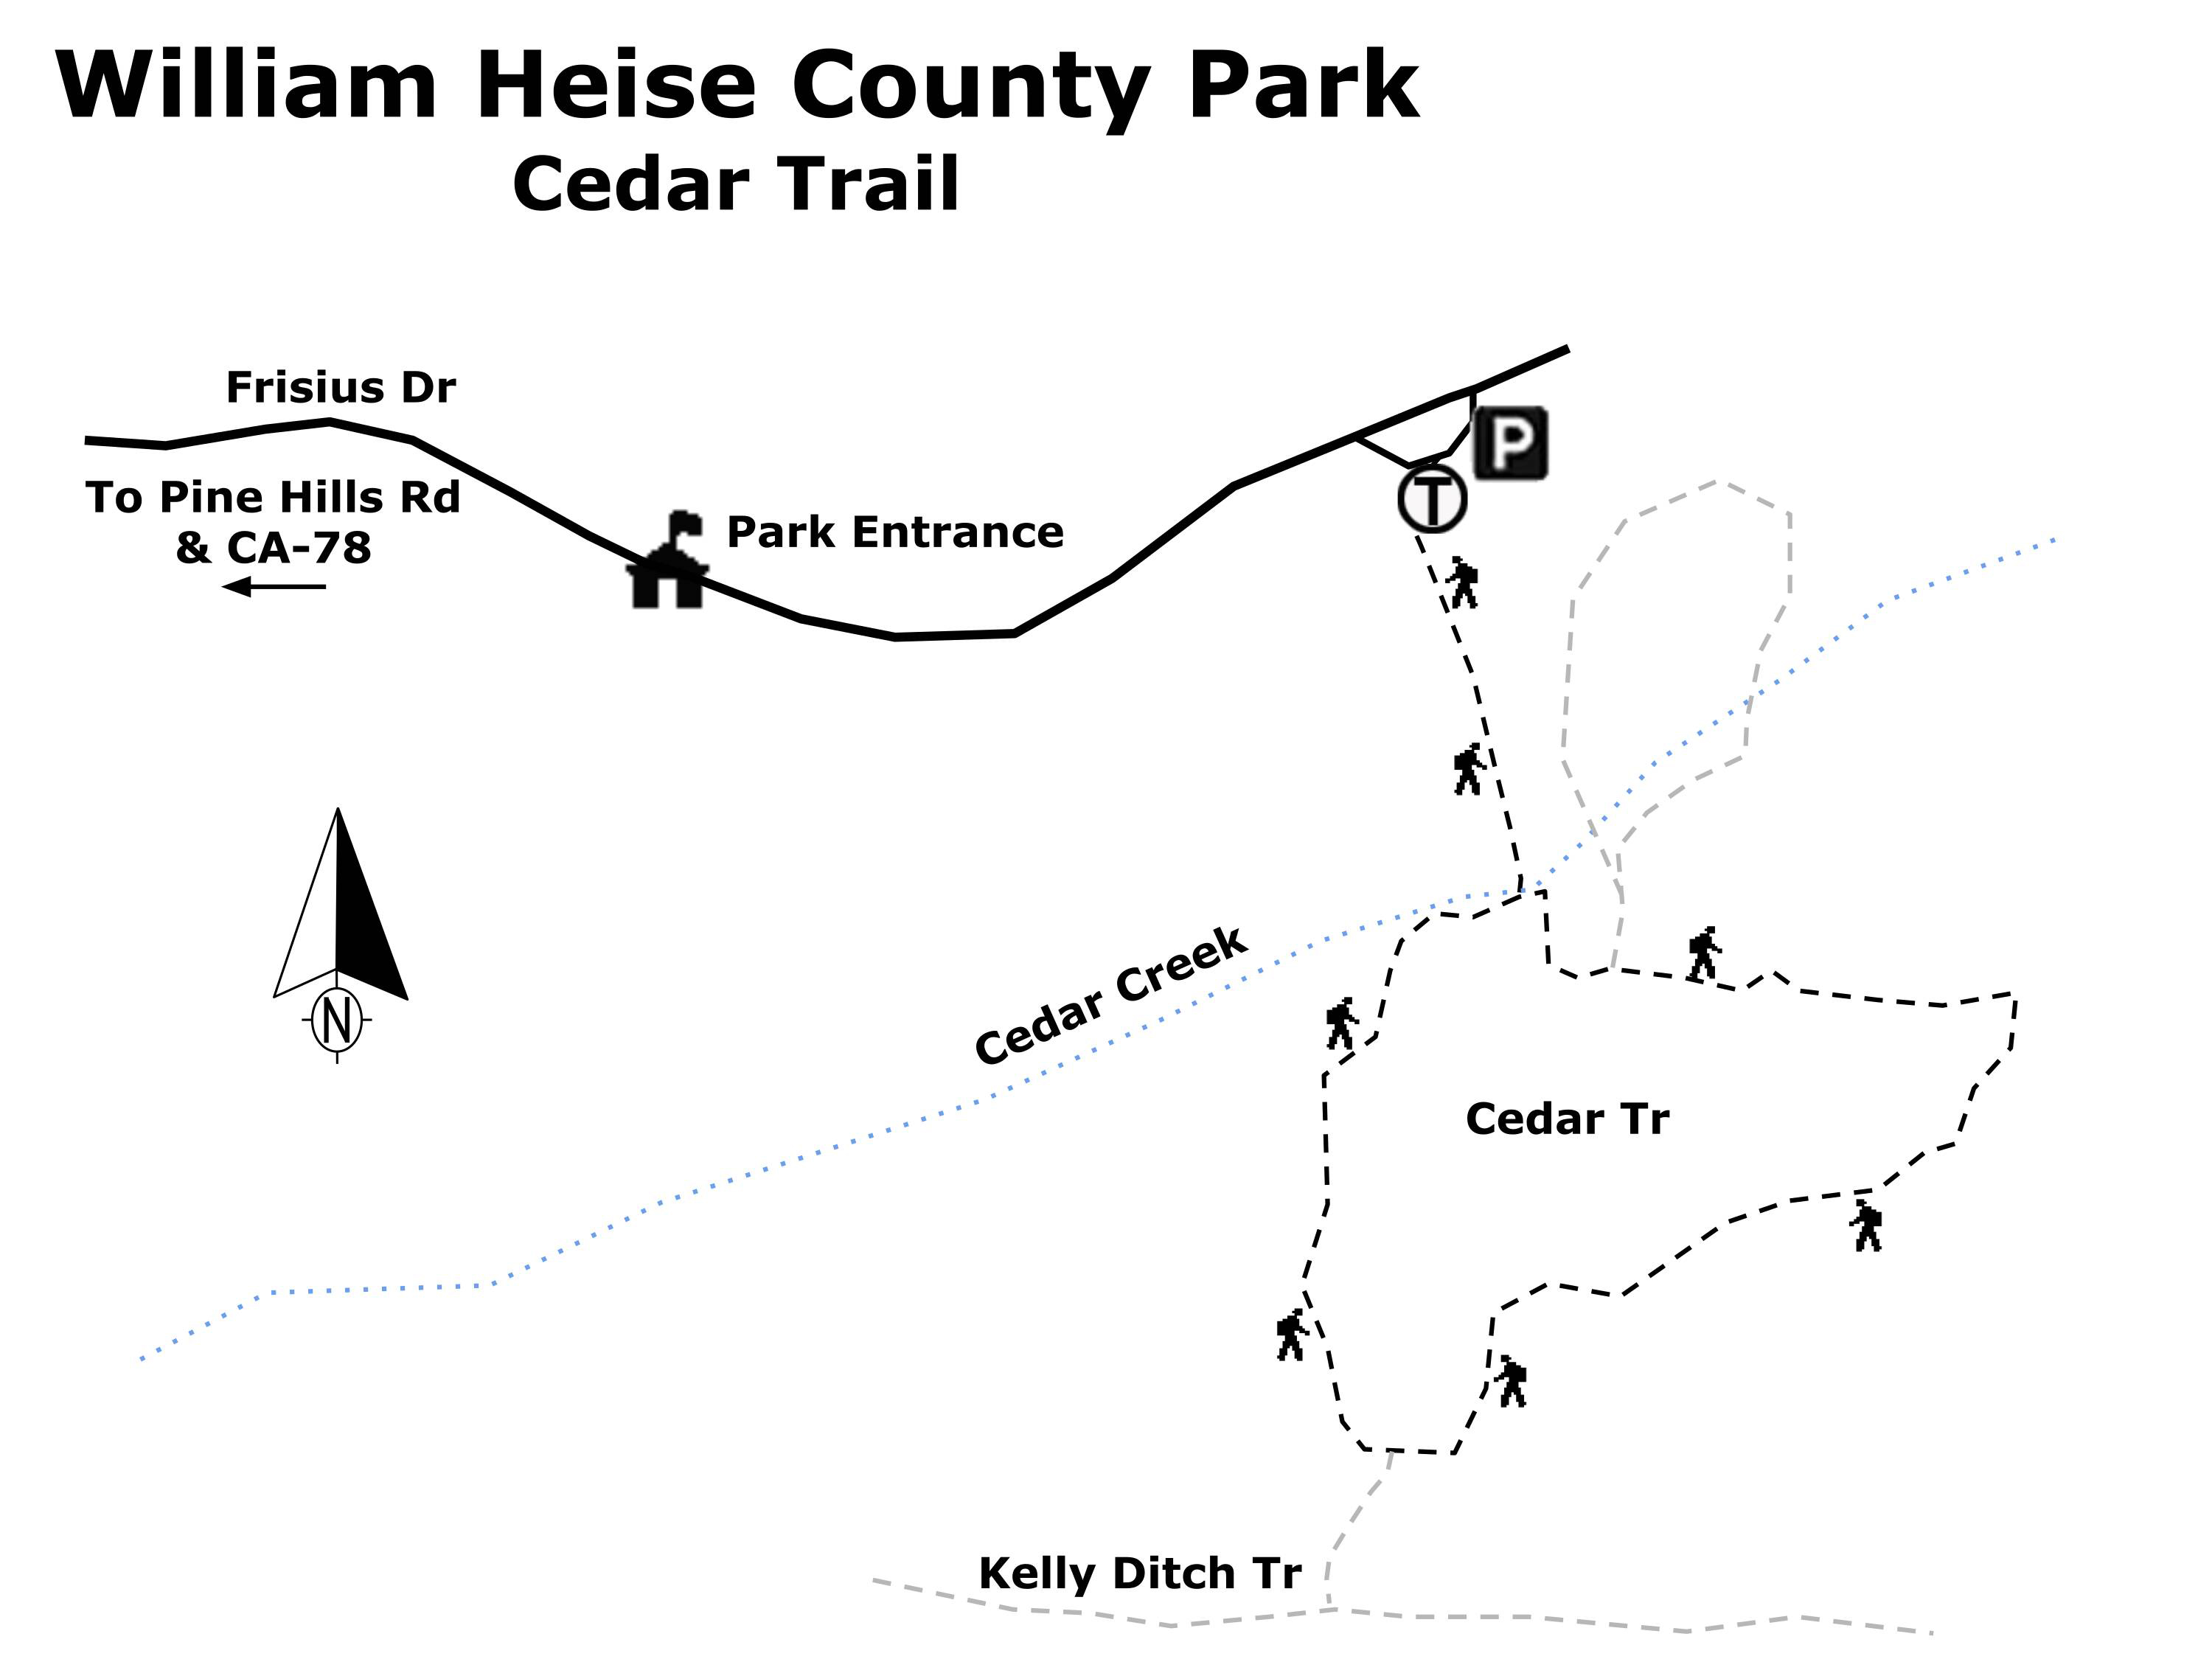 William Heise S Cedar Trail A Smell Reminiscent Of Shoe Polish San Diego Reader